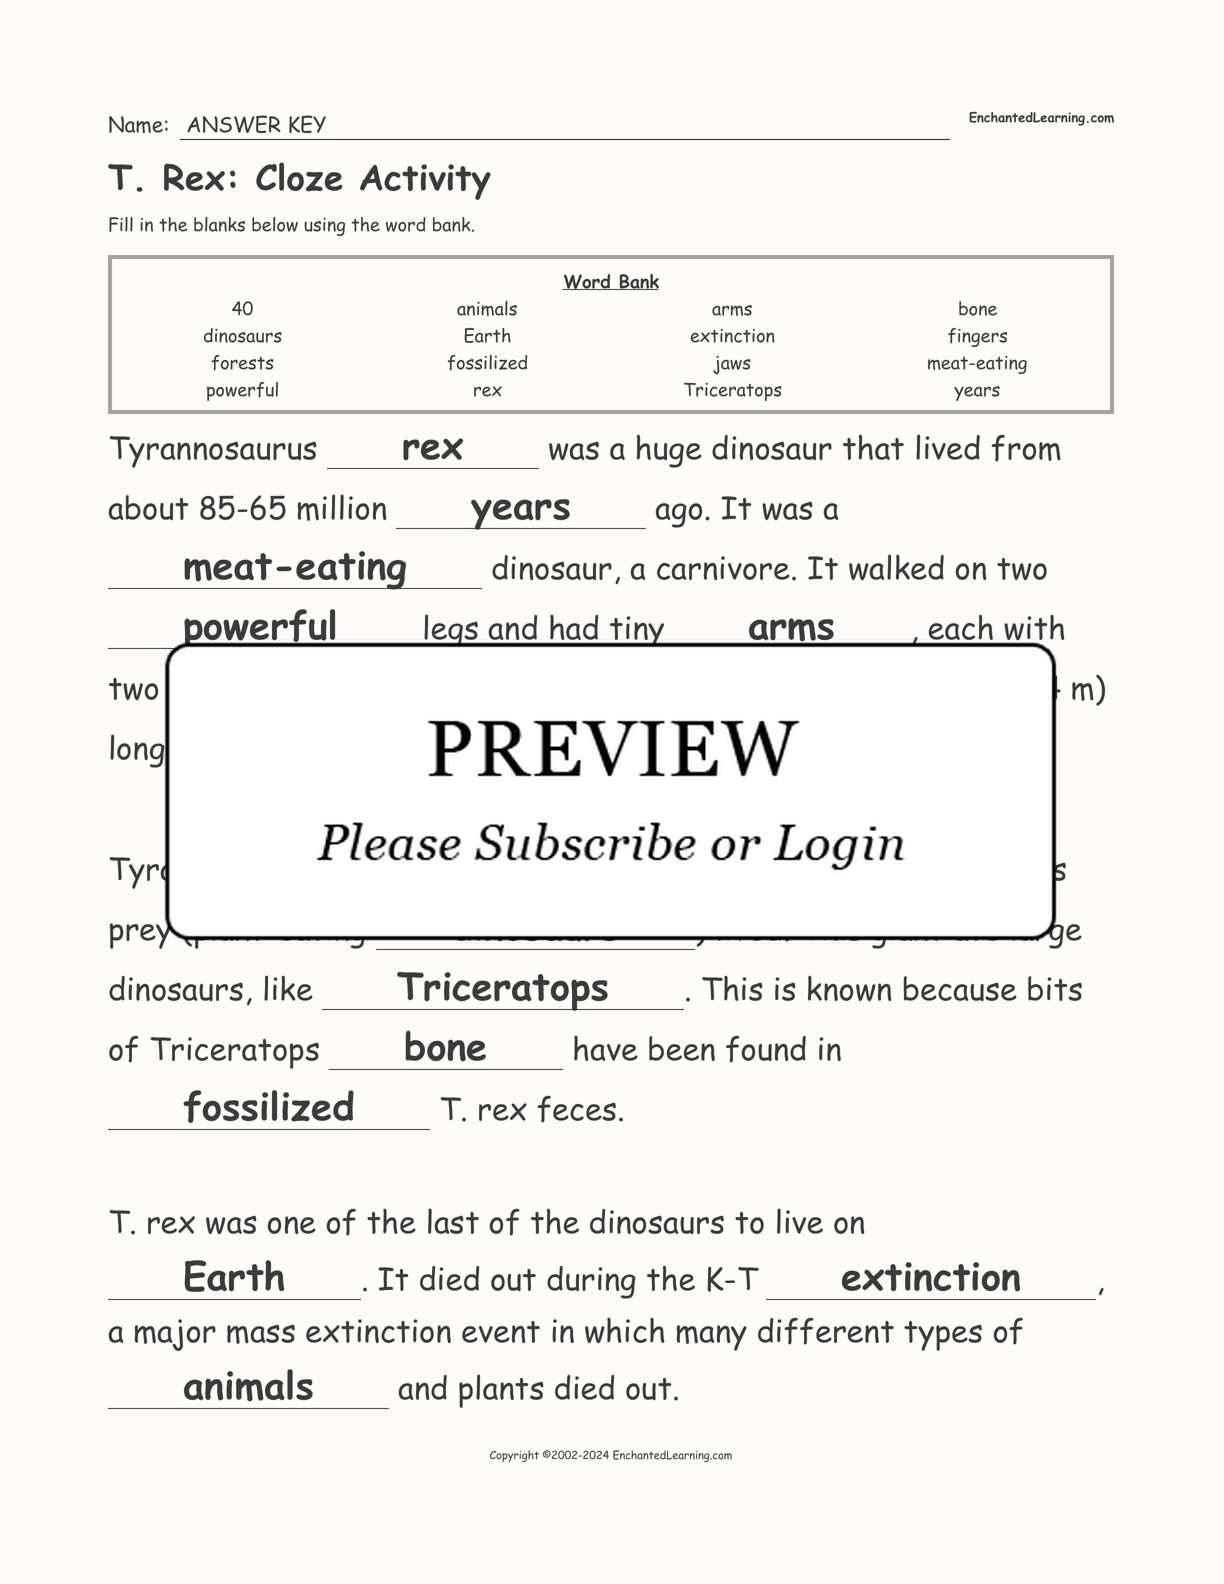 T. Rex: Cloze Activity interactive worksheet page 2